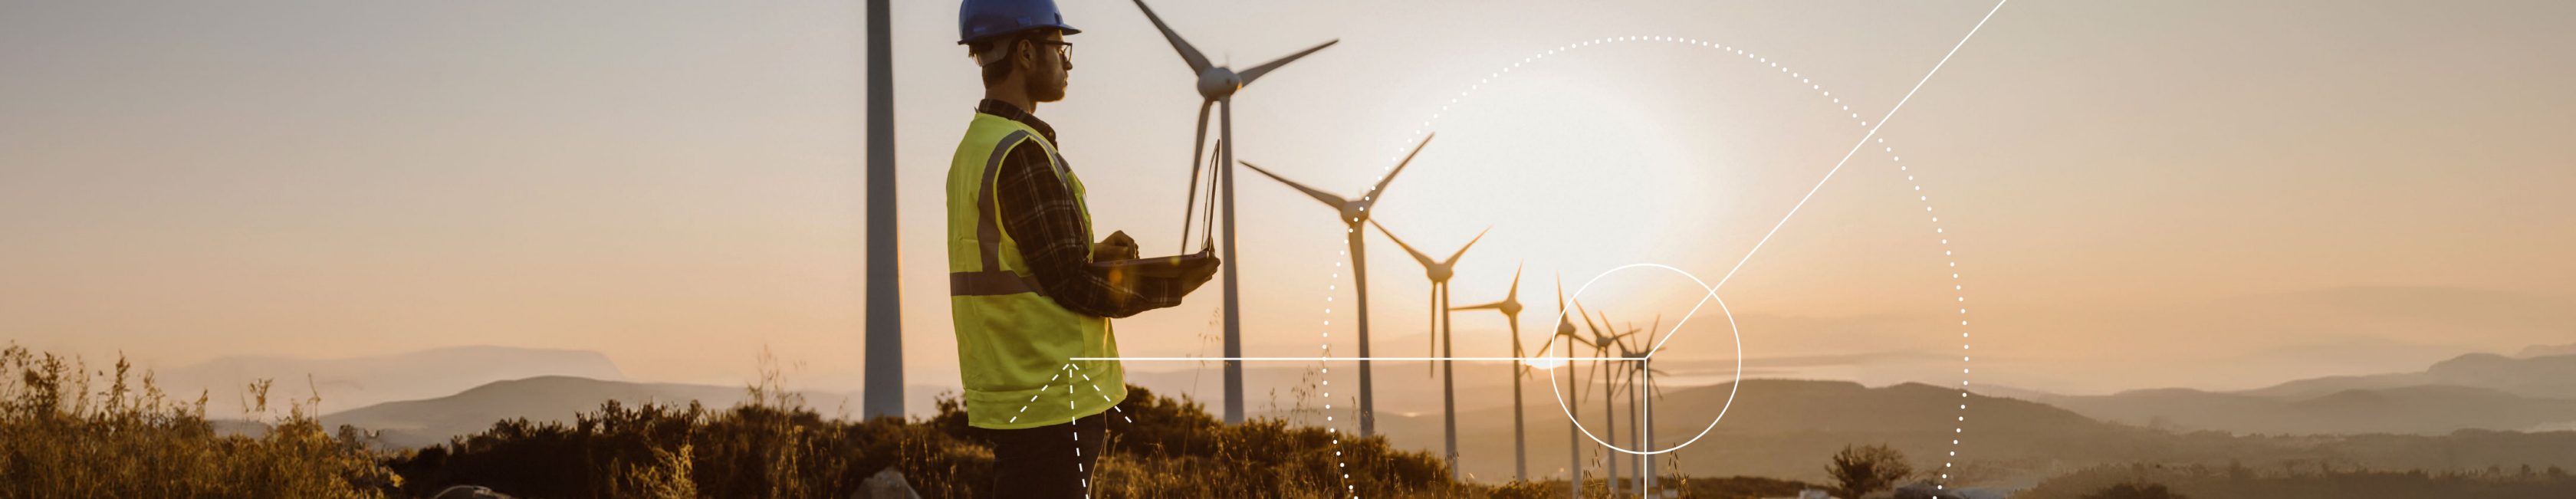 Wind turbine specialist with laptop in beautiful hilly landscape in front of a row of wind turbines in evening mood